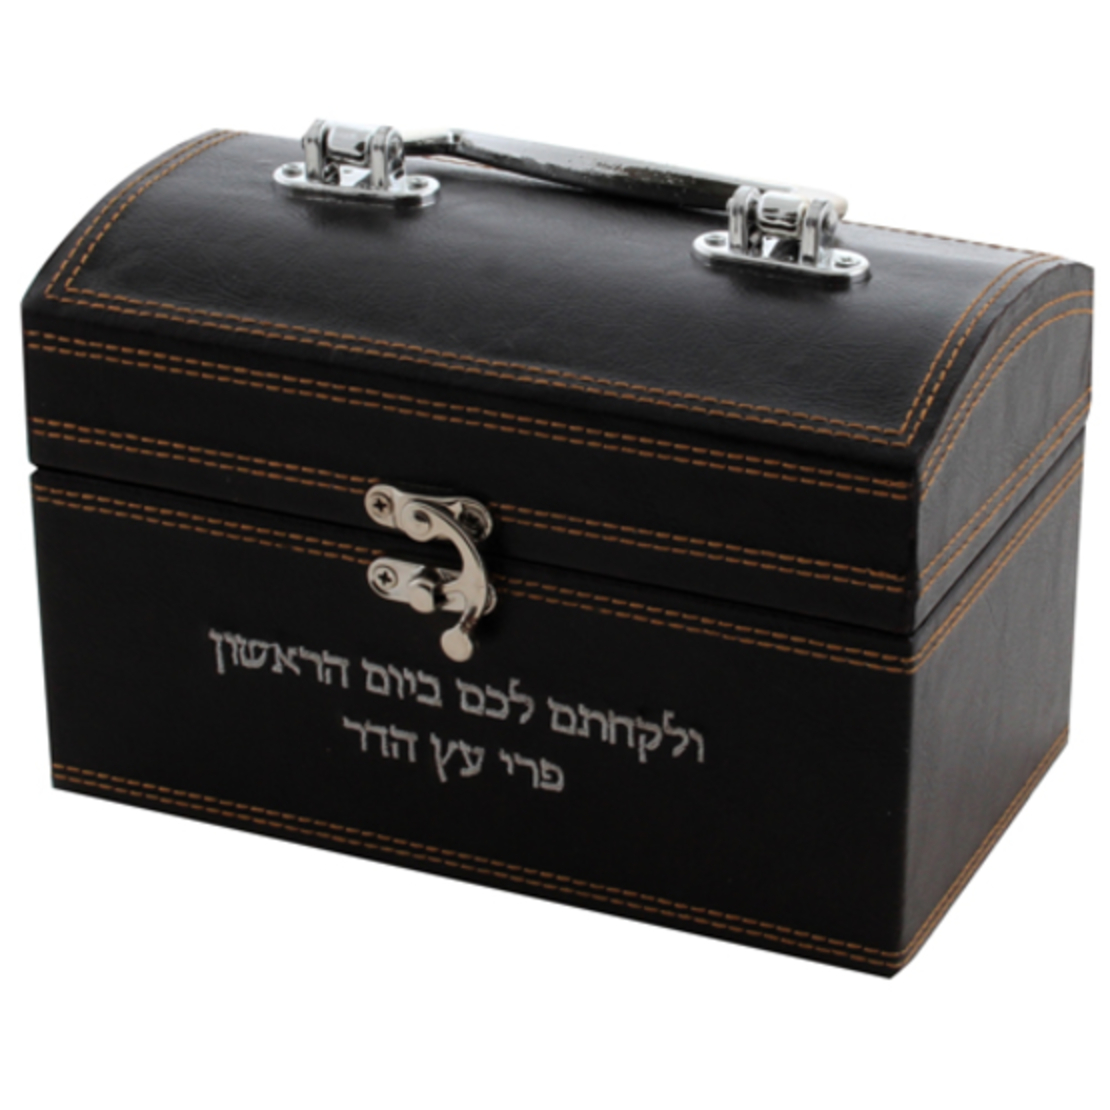 Fancy leather-like etrog box with plaque, handle and metal lock - dark brown